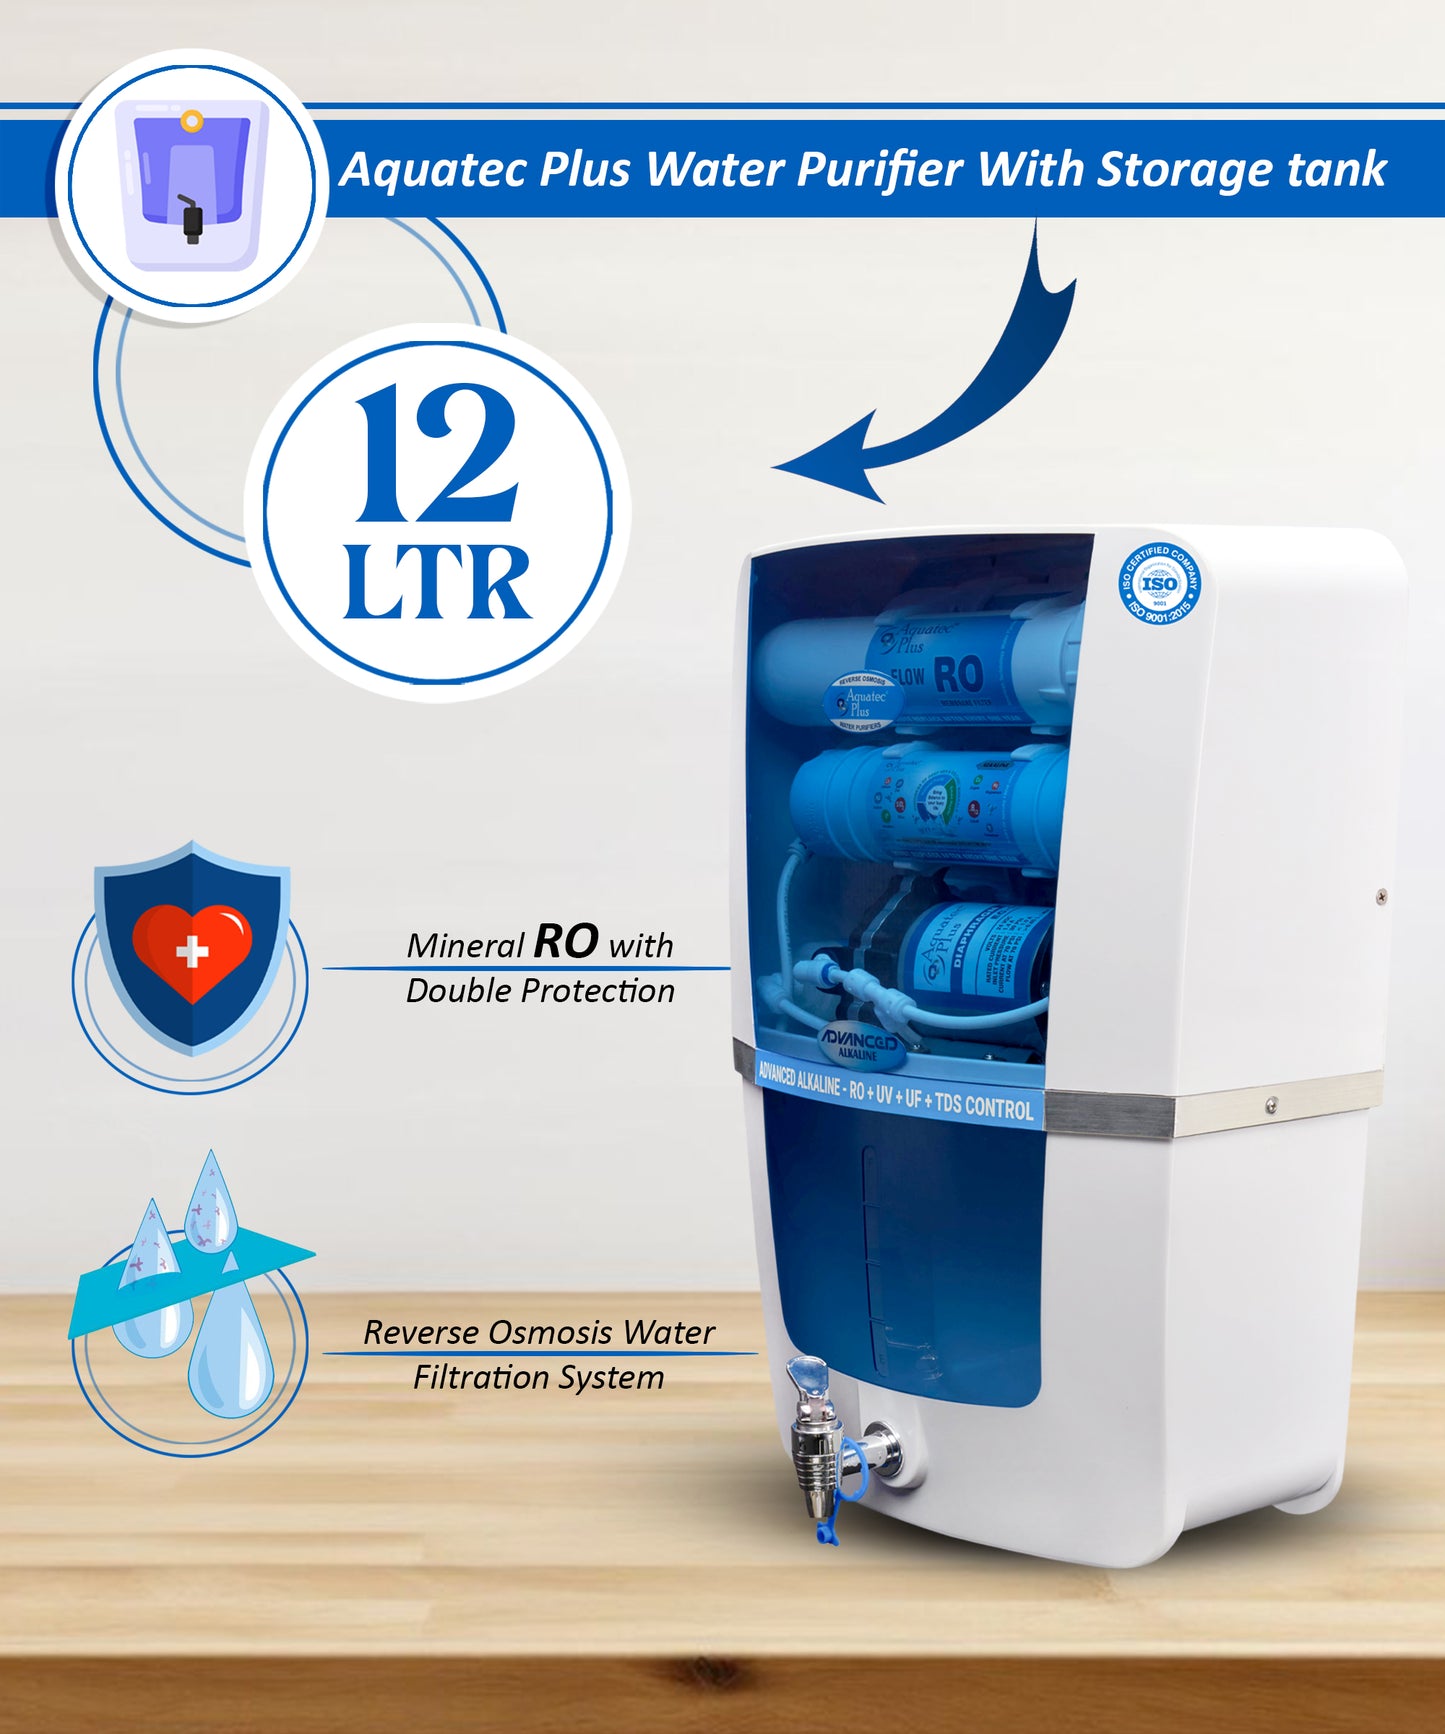 RO PURIFIER FOR HOME